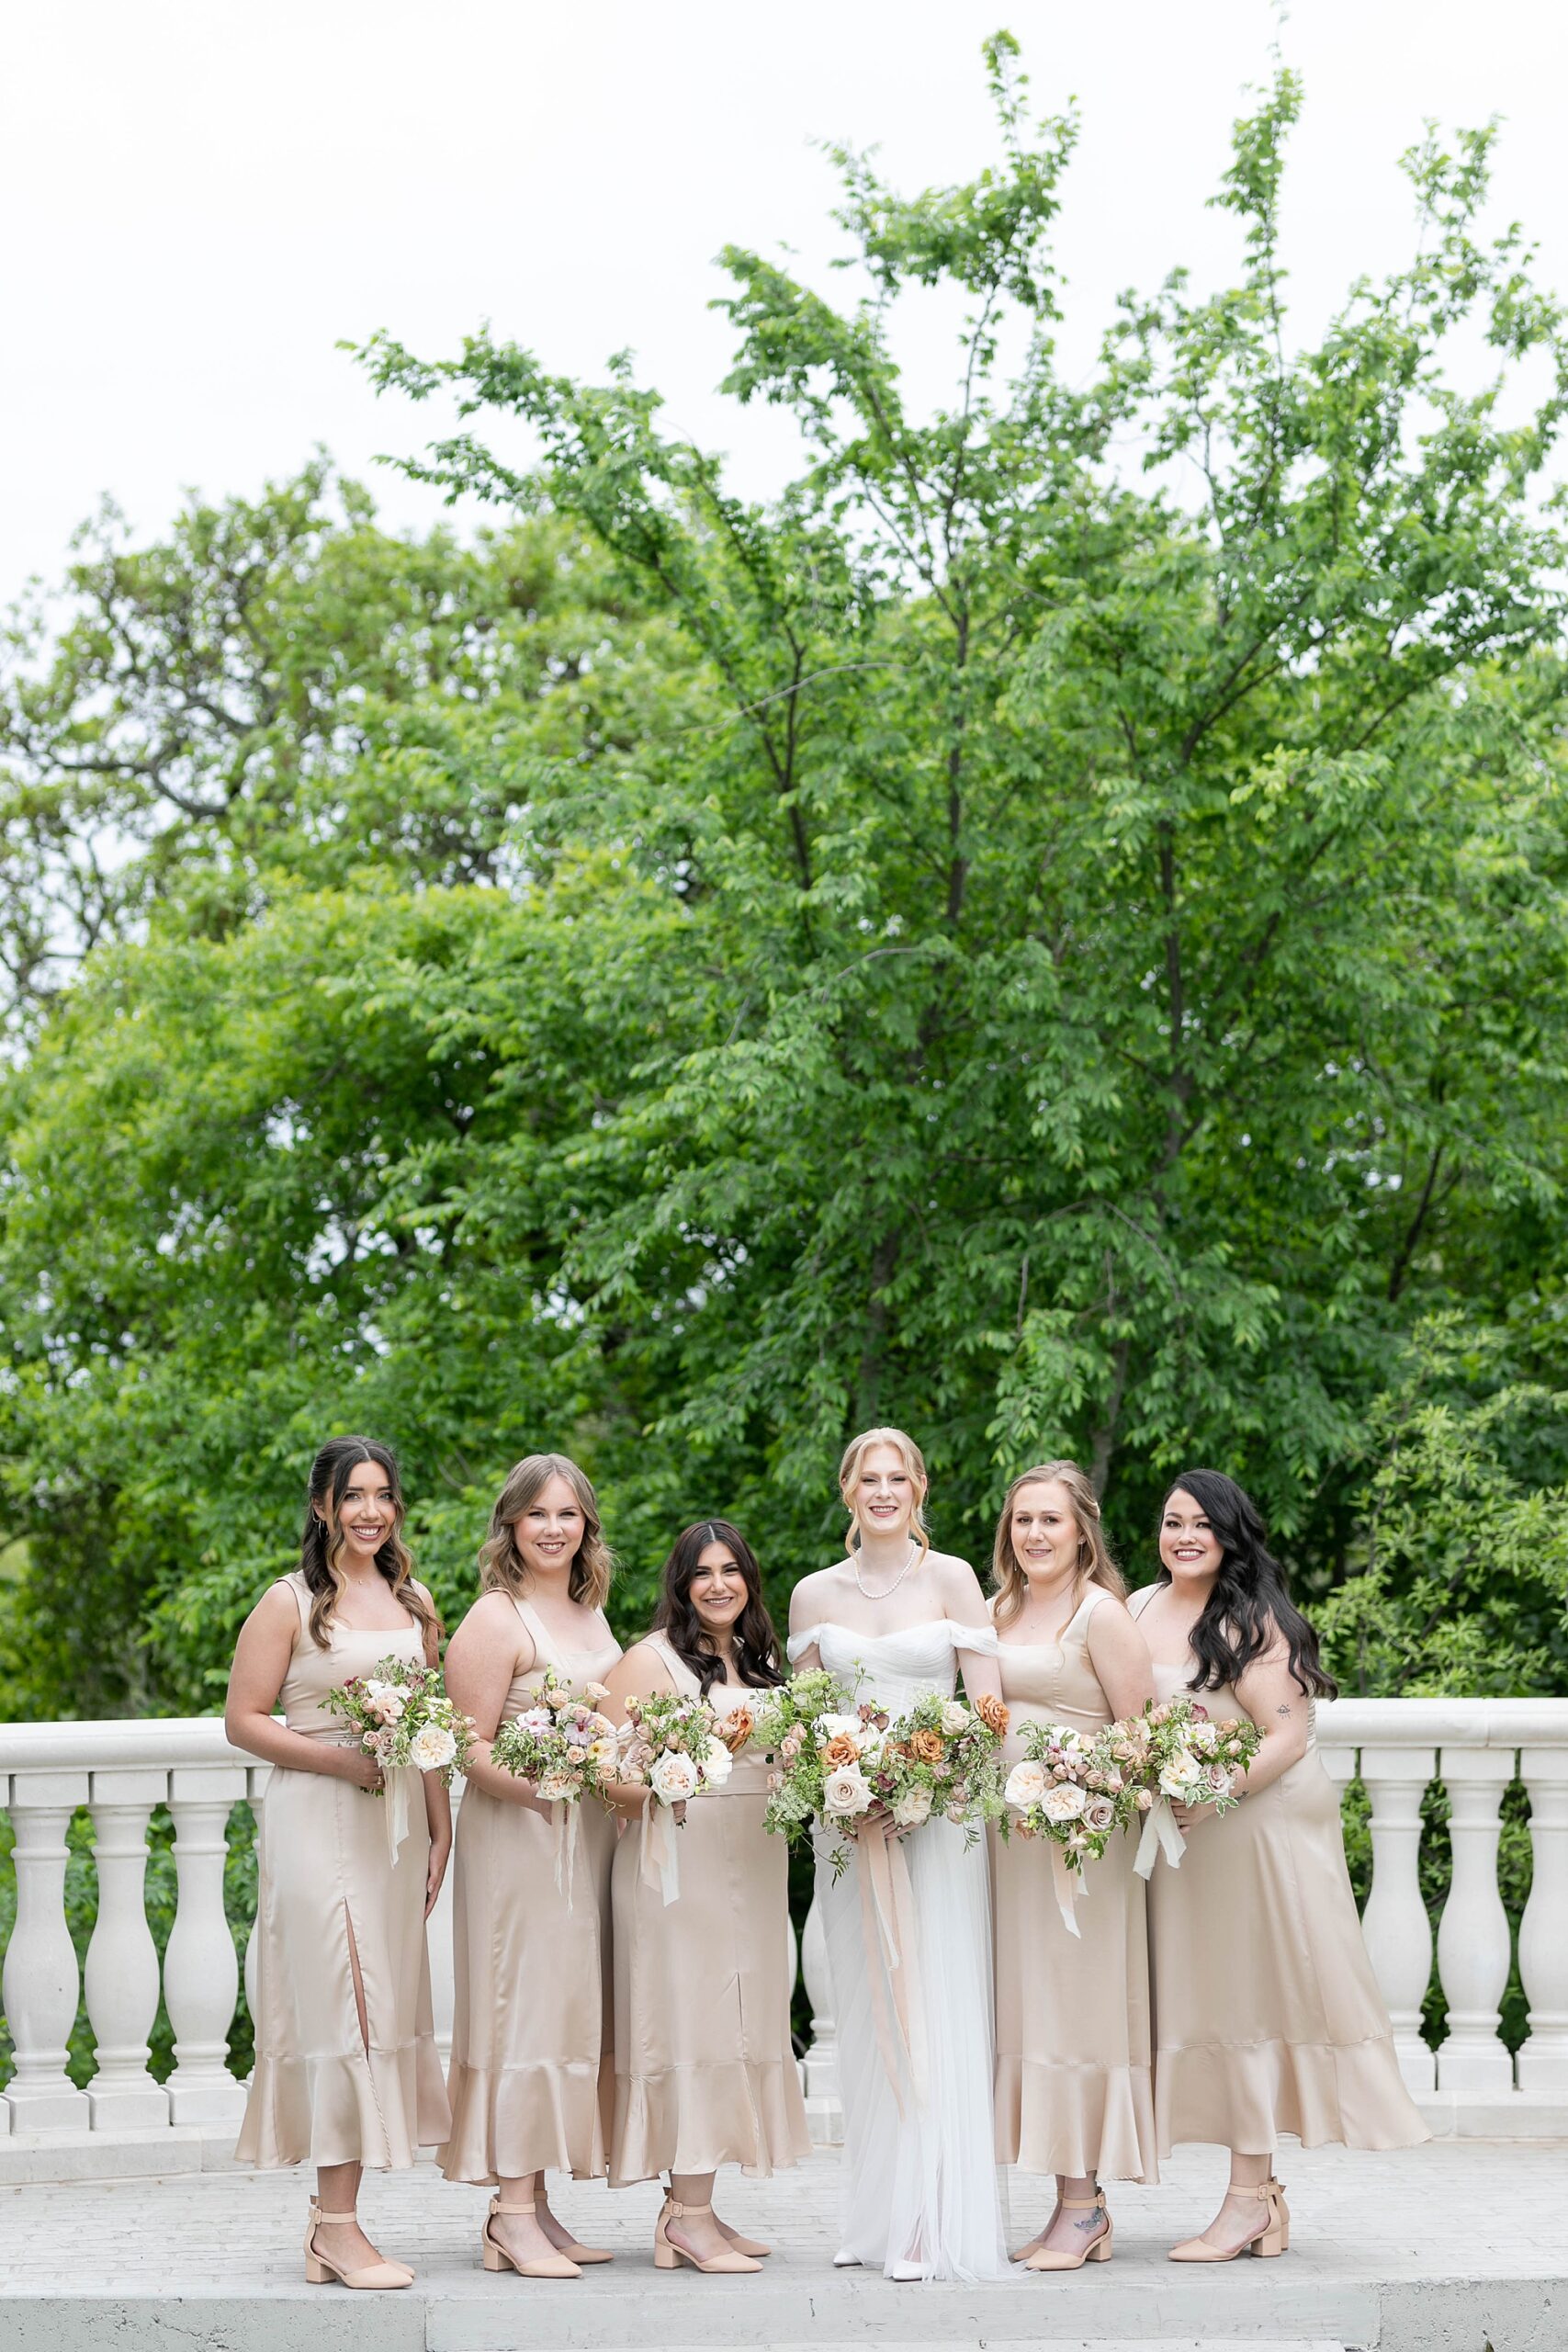 bride poses with bridesmaids in champagne gowns on patio at the Hillside Estate